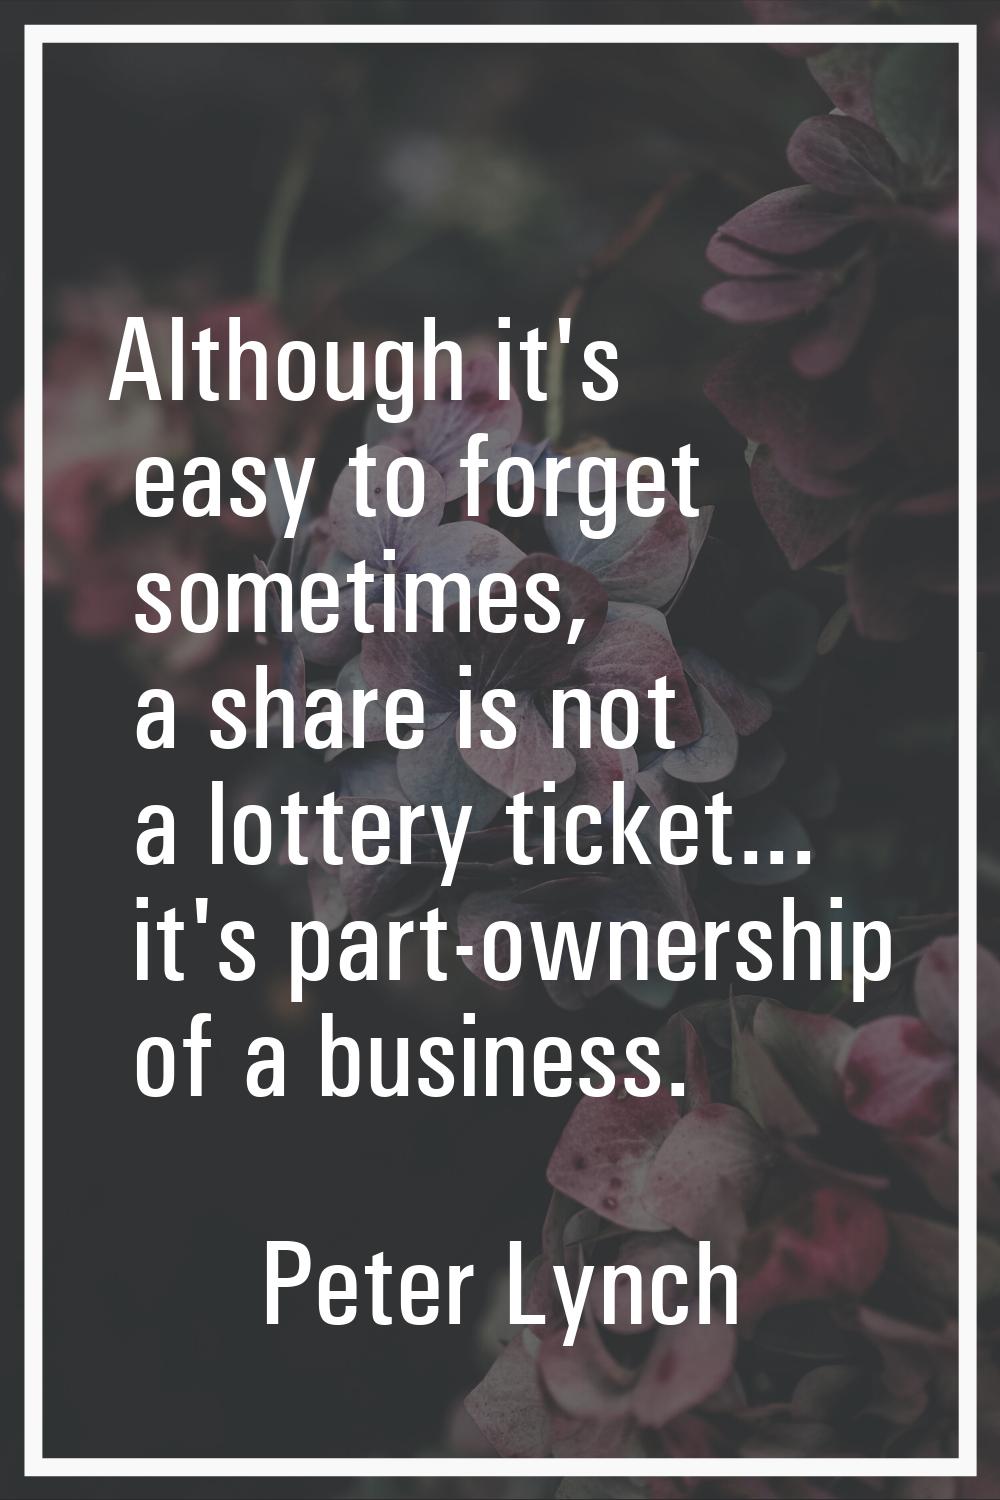 Although it's easy to forget sometimes, a share is not a lottery ticket... it's part-ownership of a